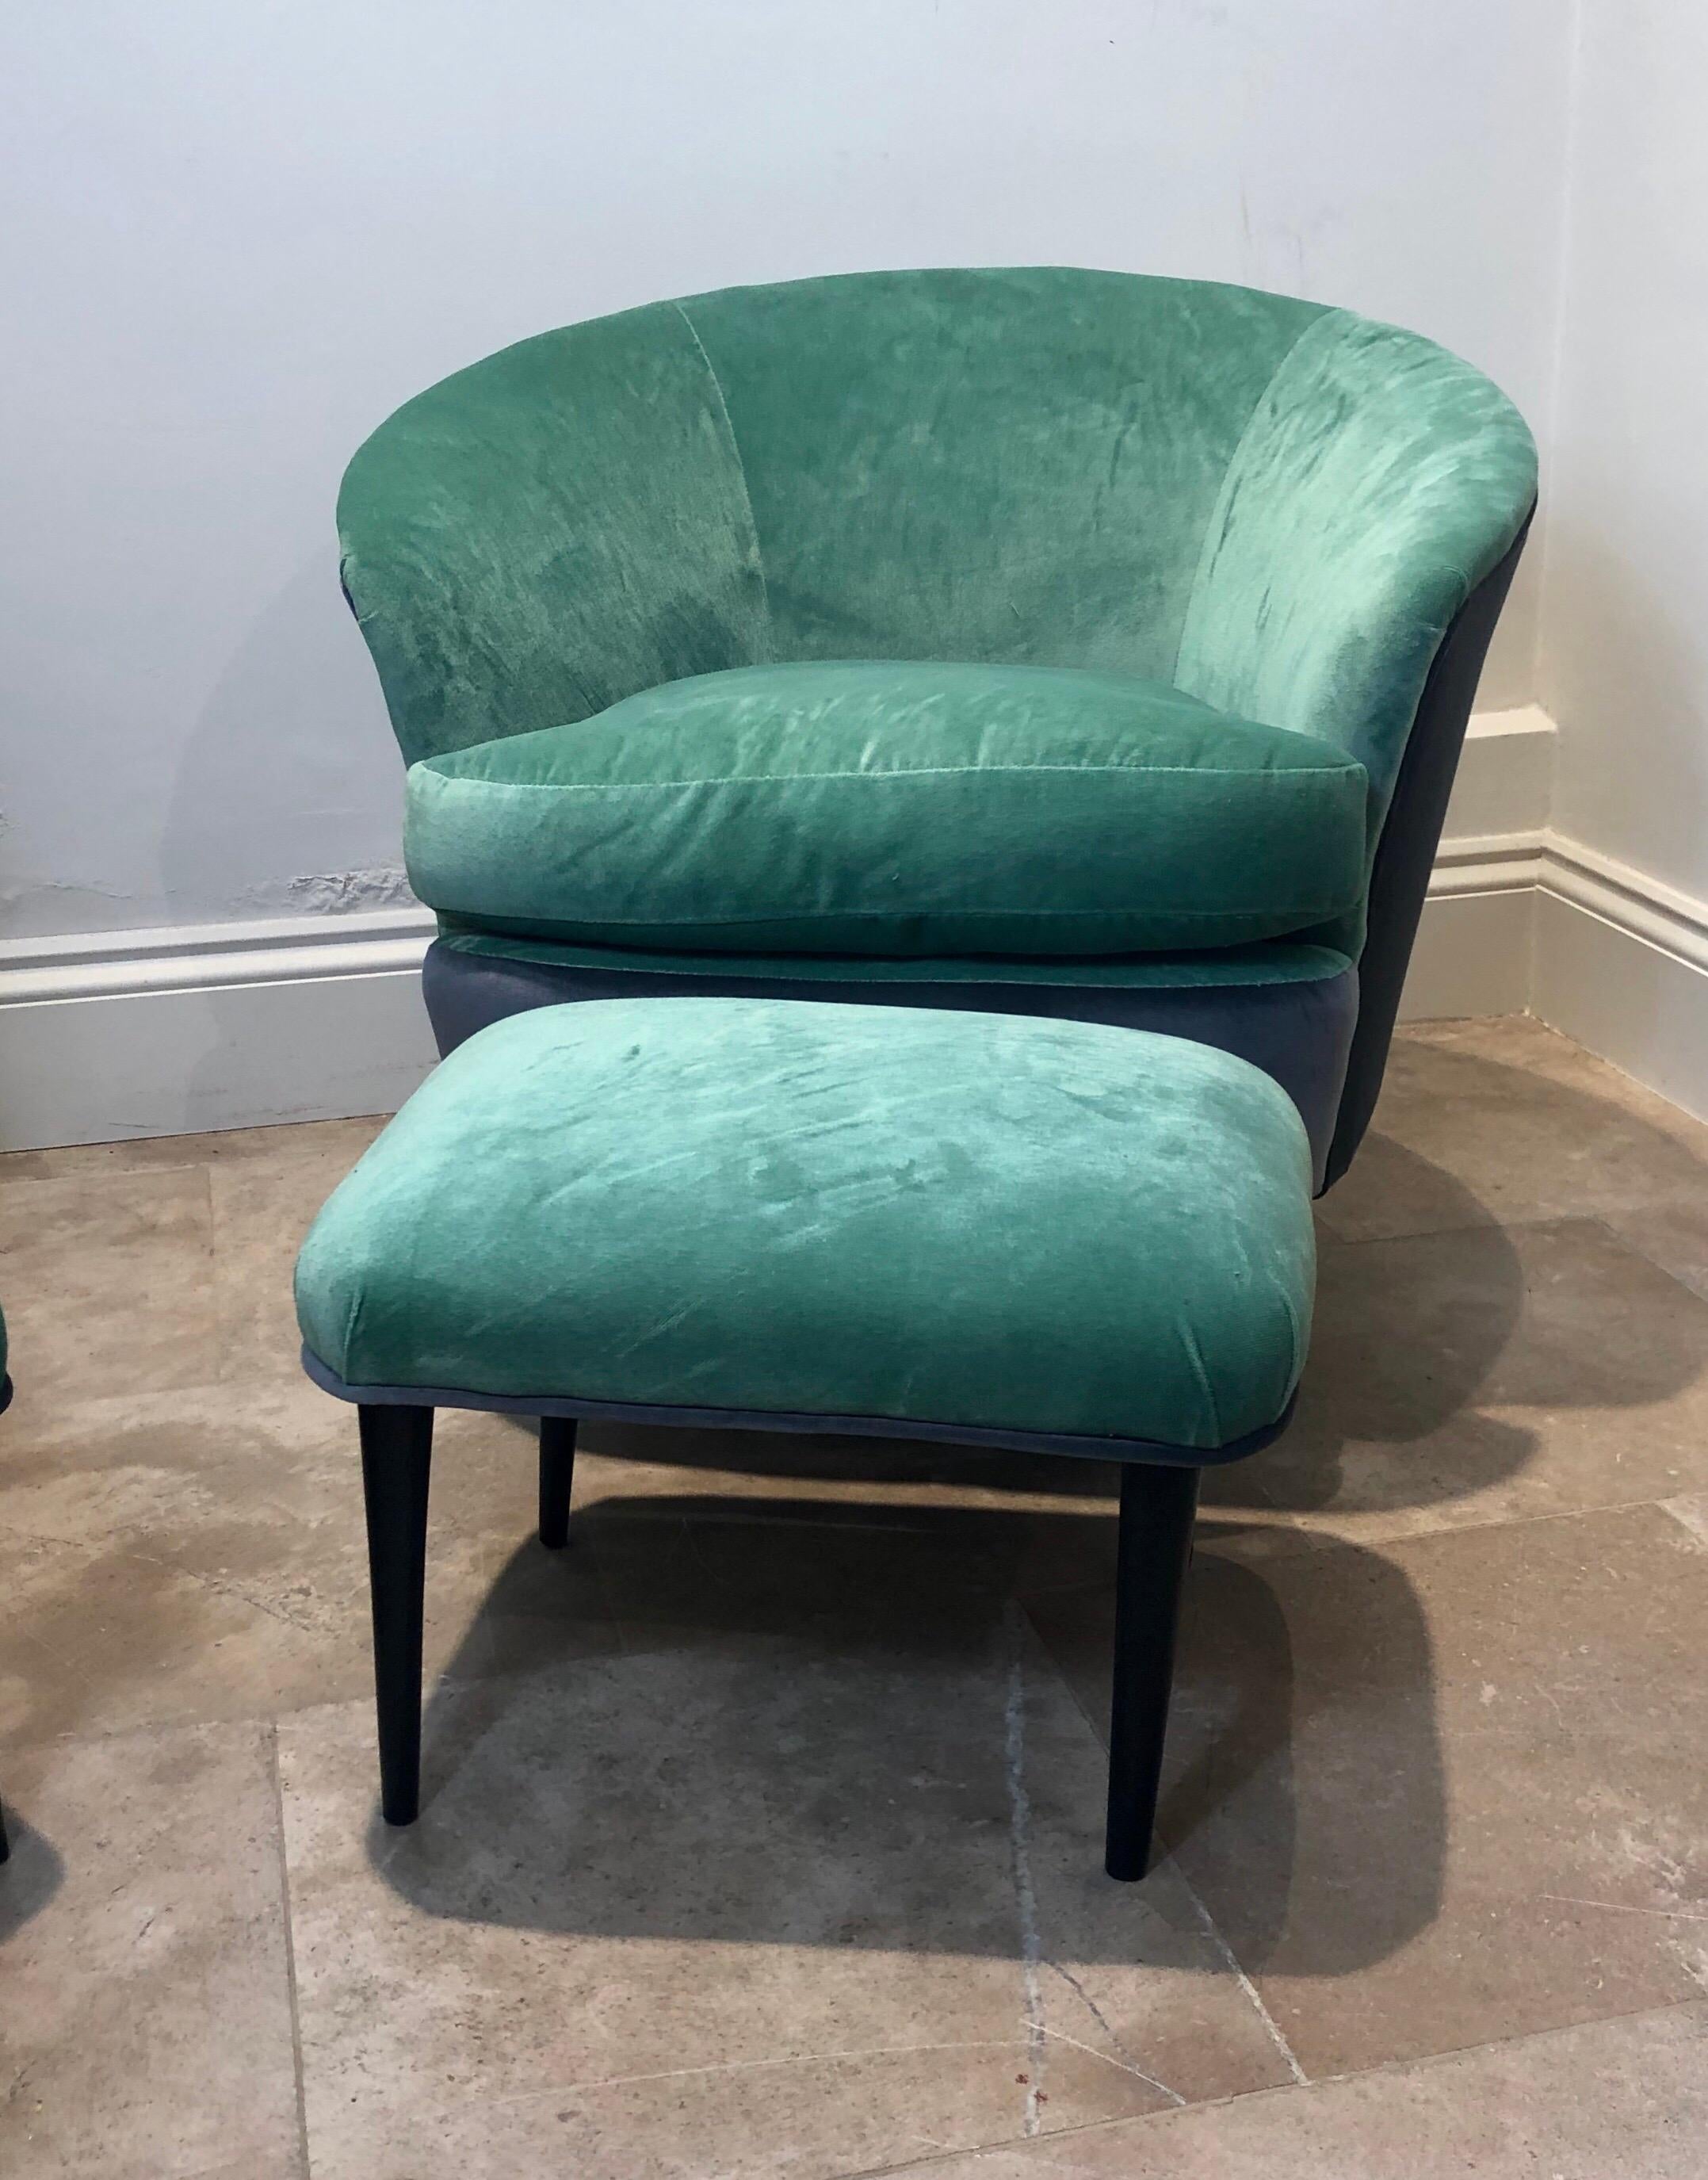 Velvet Pair of Italian Curved Chairs and Stools with Mint Green and Grey Upholstery For Sale